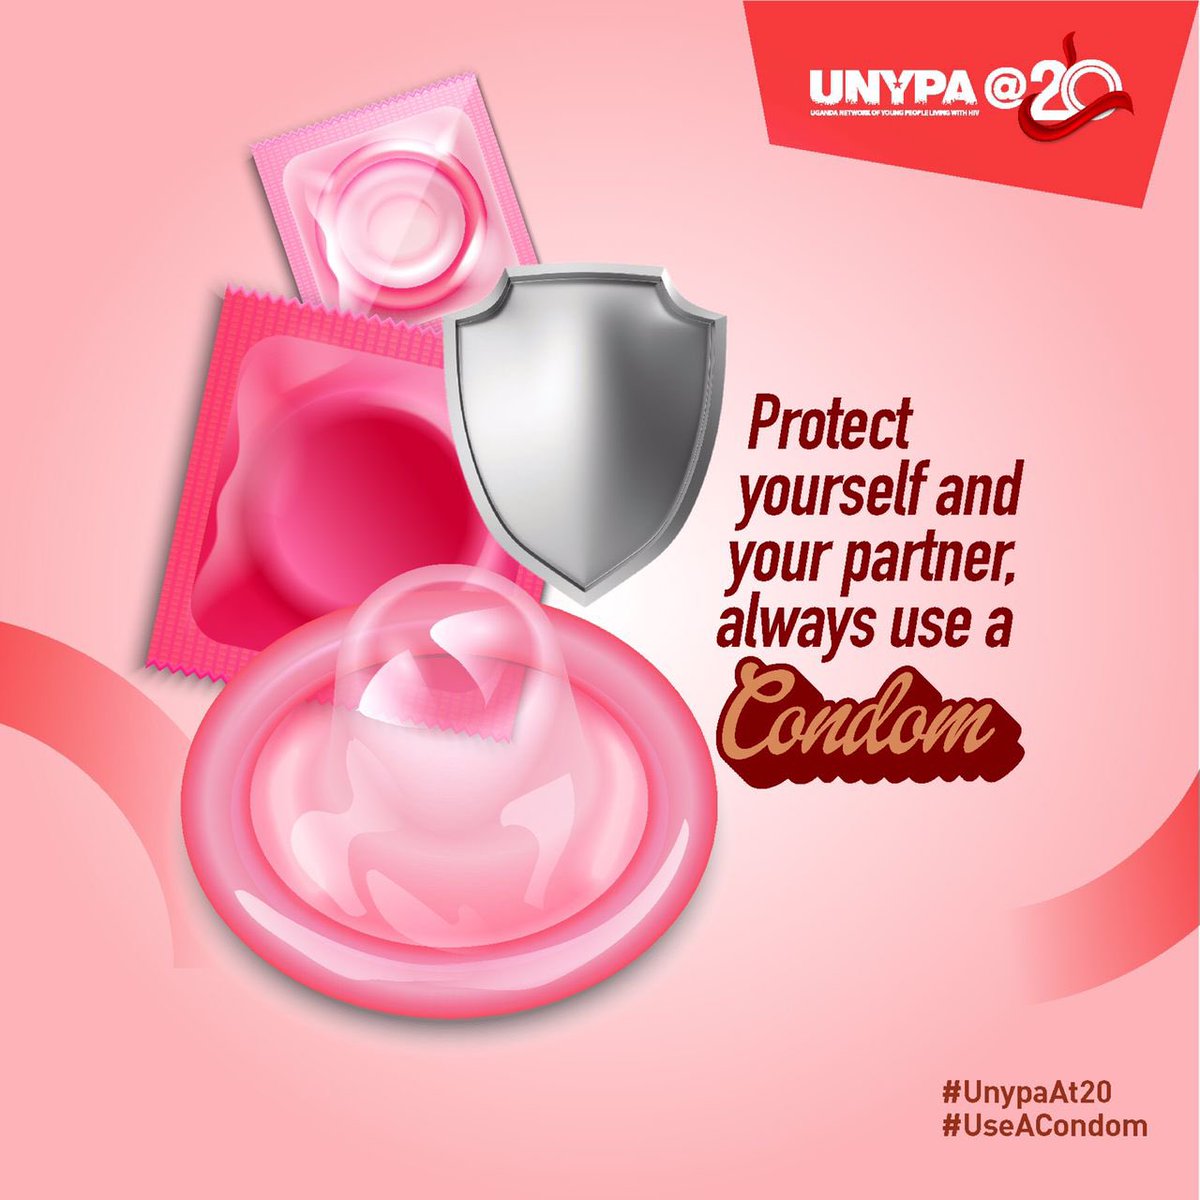 As we head into the weekend vibes, don’t forget to #UseACondom when engaging in any sexual activity. Protect yourself and your partner always. 

#UnypaAt20